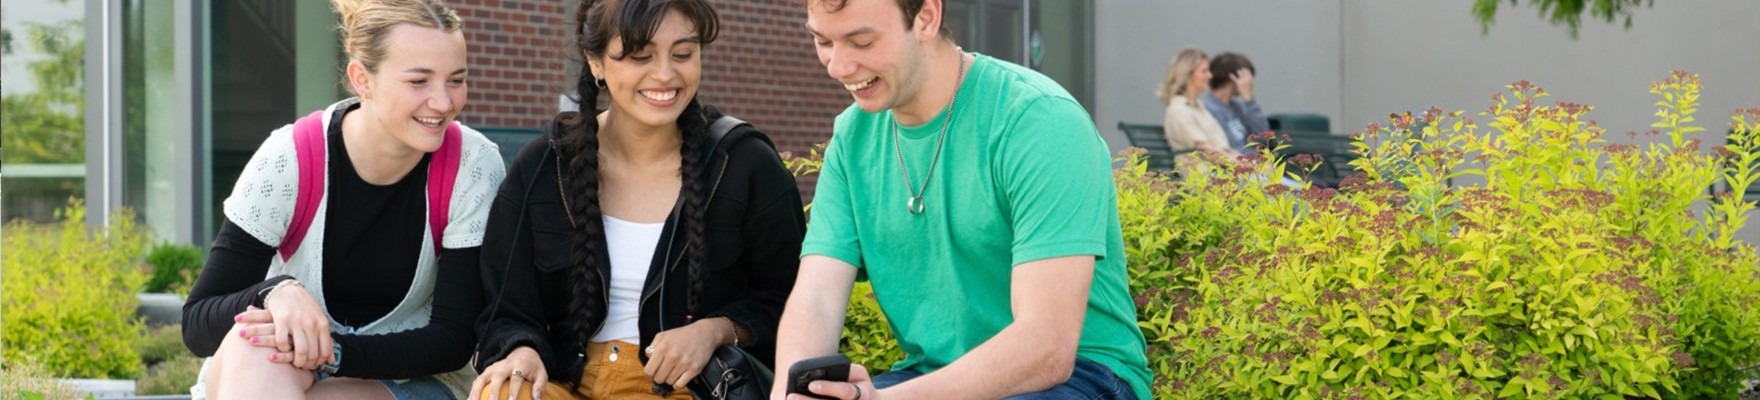 Students outside a campus building looking at a mobile phone